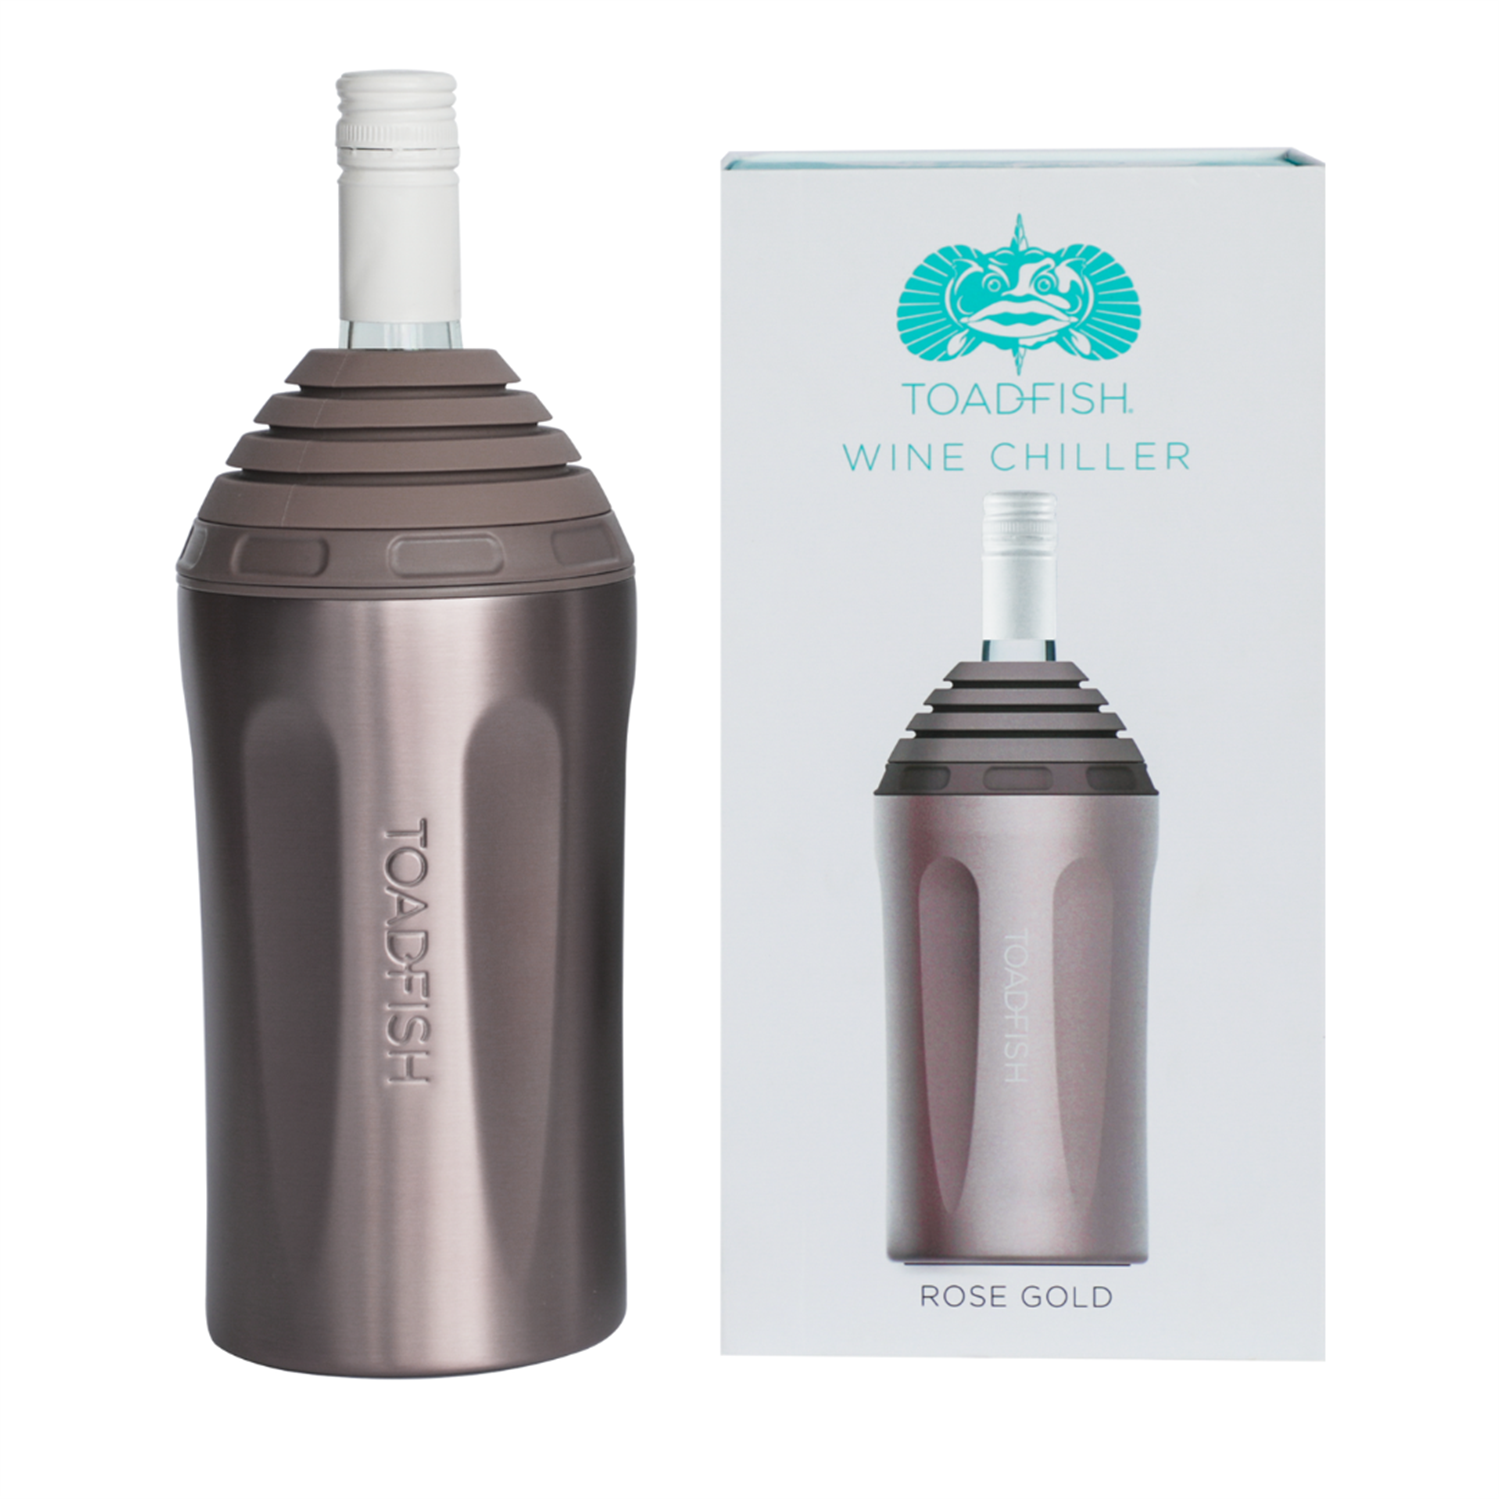 TOADFISH Toadfish Insulated Wine Chiller With Flexi-lock Pouring, Fits Most Bottles